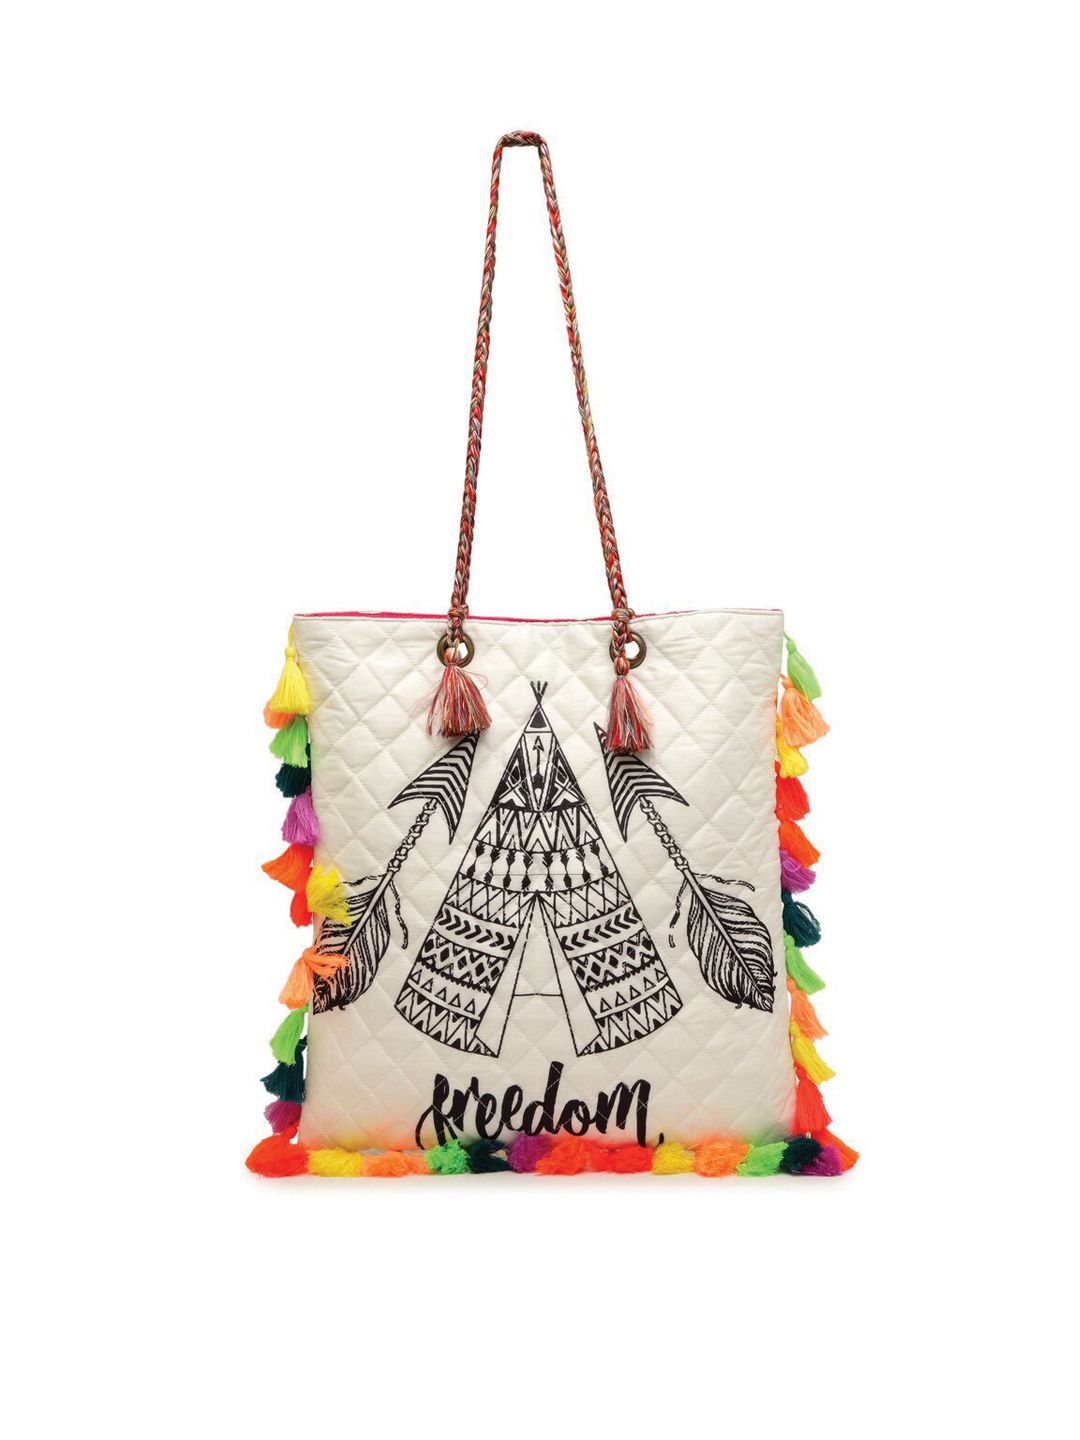 The House of Tara White & Gold-Toned Printed Quilted Shopper Tote Bag Price in India